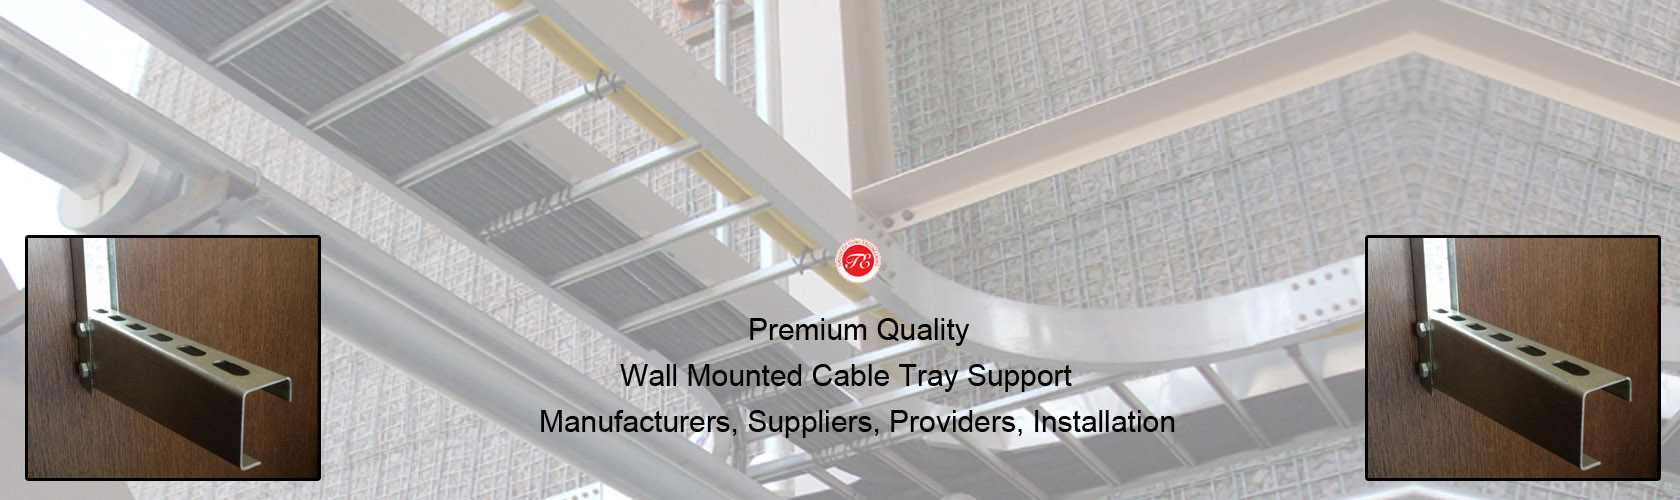 Wall Mounted Cable Tray Support